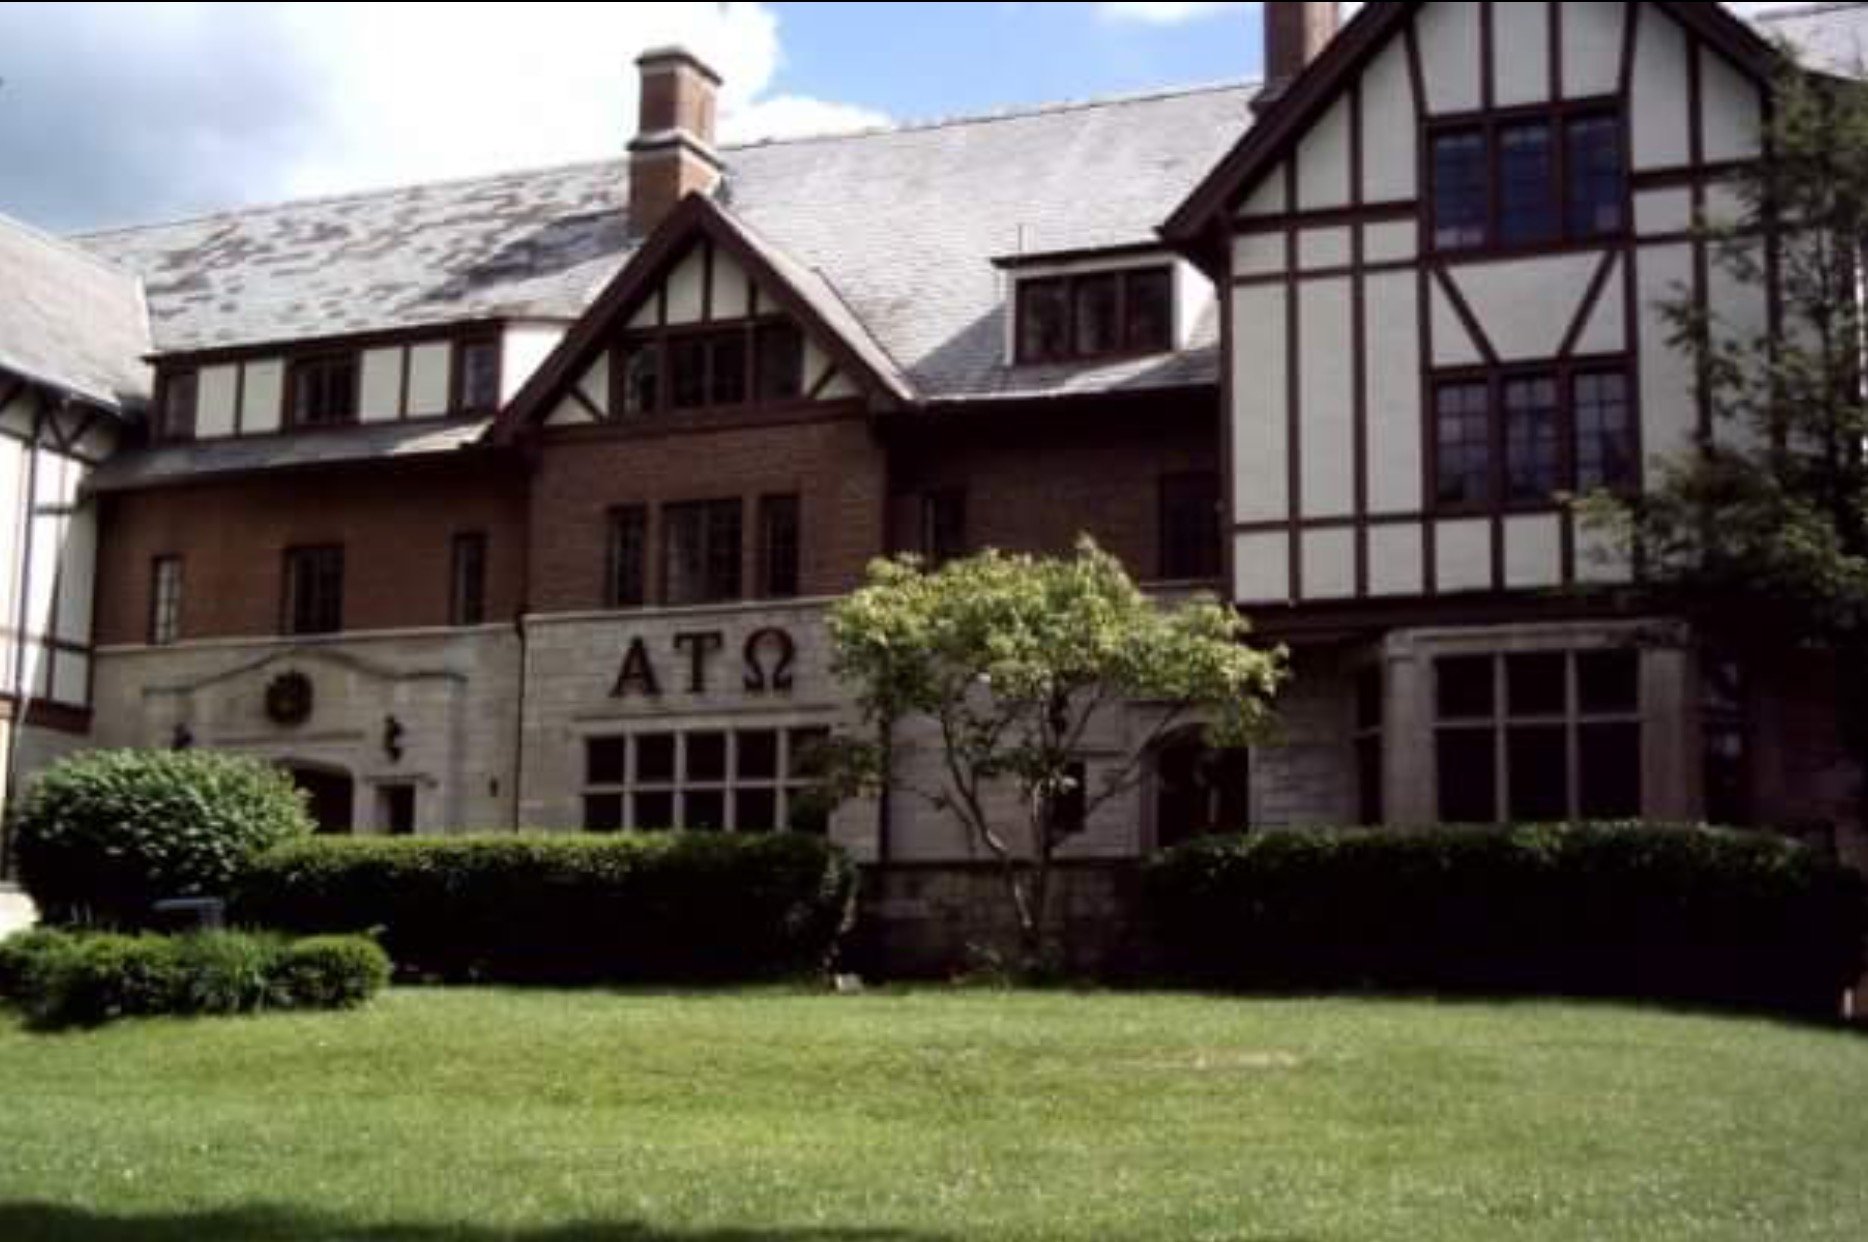 New rules at IU allow officials to enter fraternities, sororities with  probable cause